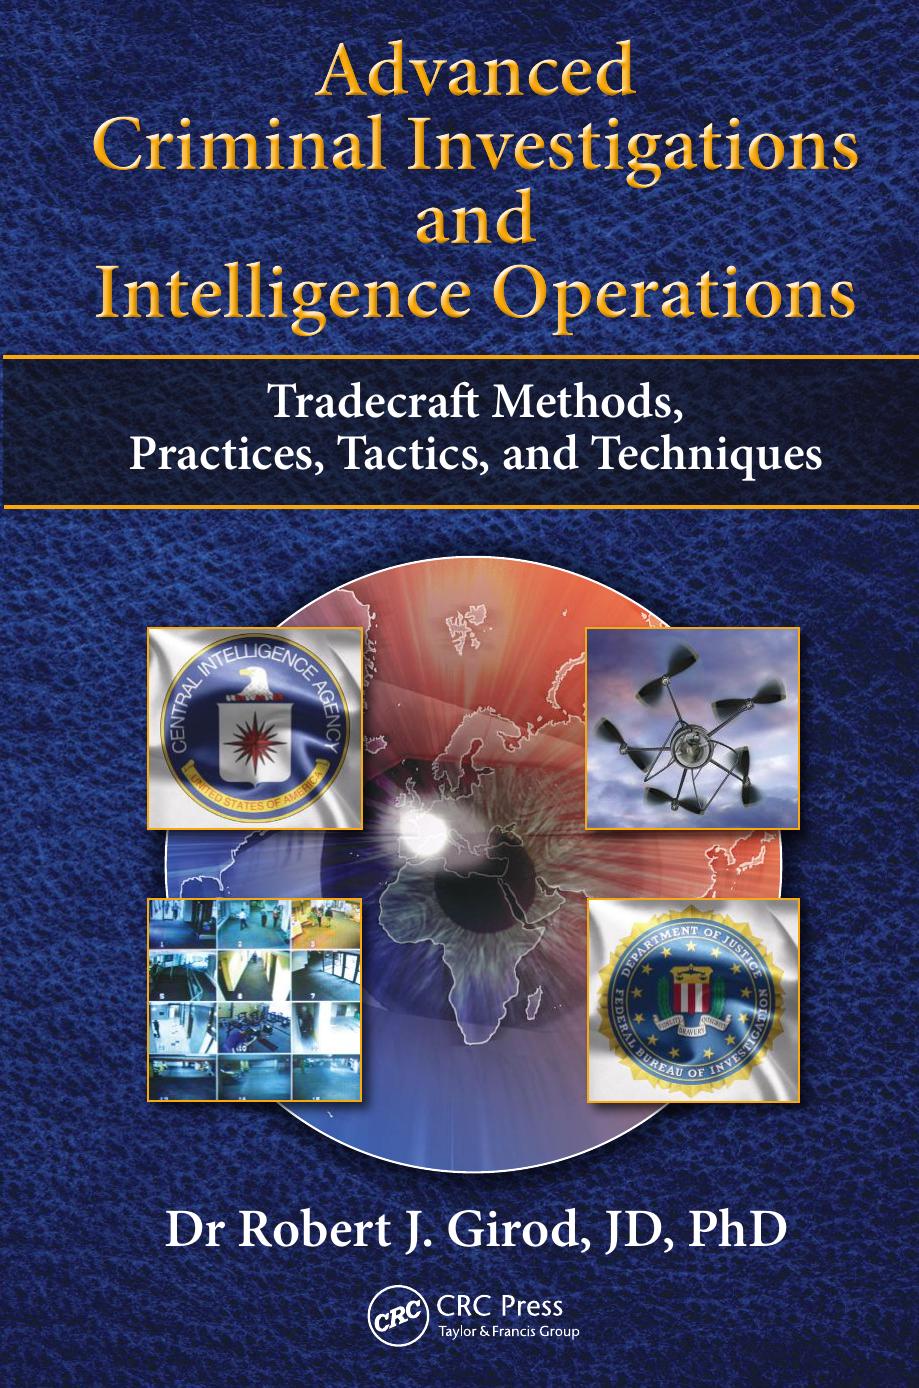 Advanced Criminal Investigations and Intelligence Operations: Tradecraft Methods, Practices, Tactics, and Techniques